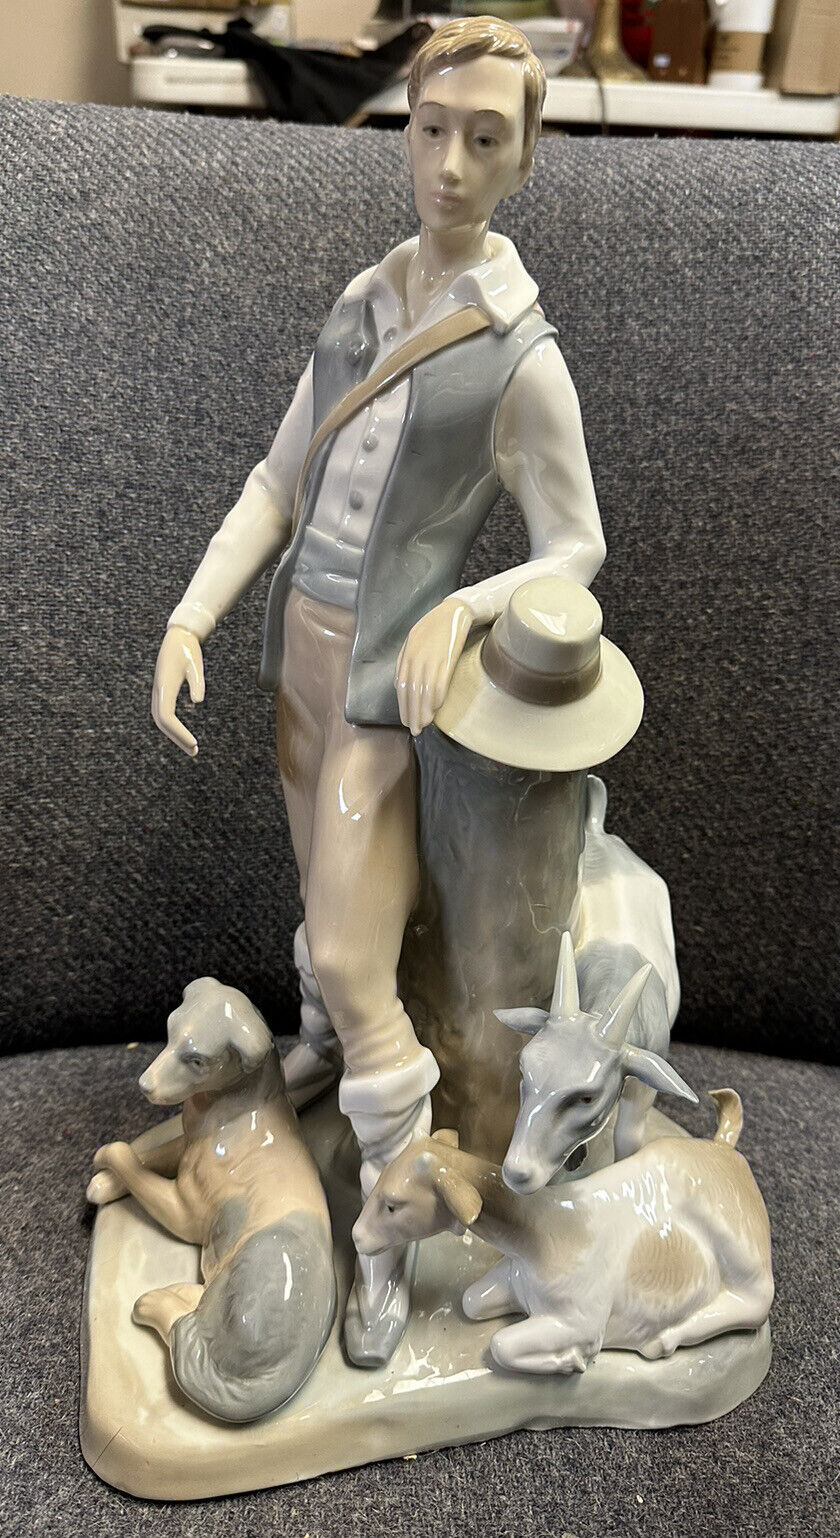 *Rare* Vintage Zaphir Lladro Porcelain Figurine Shepherd with Dog and Goats